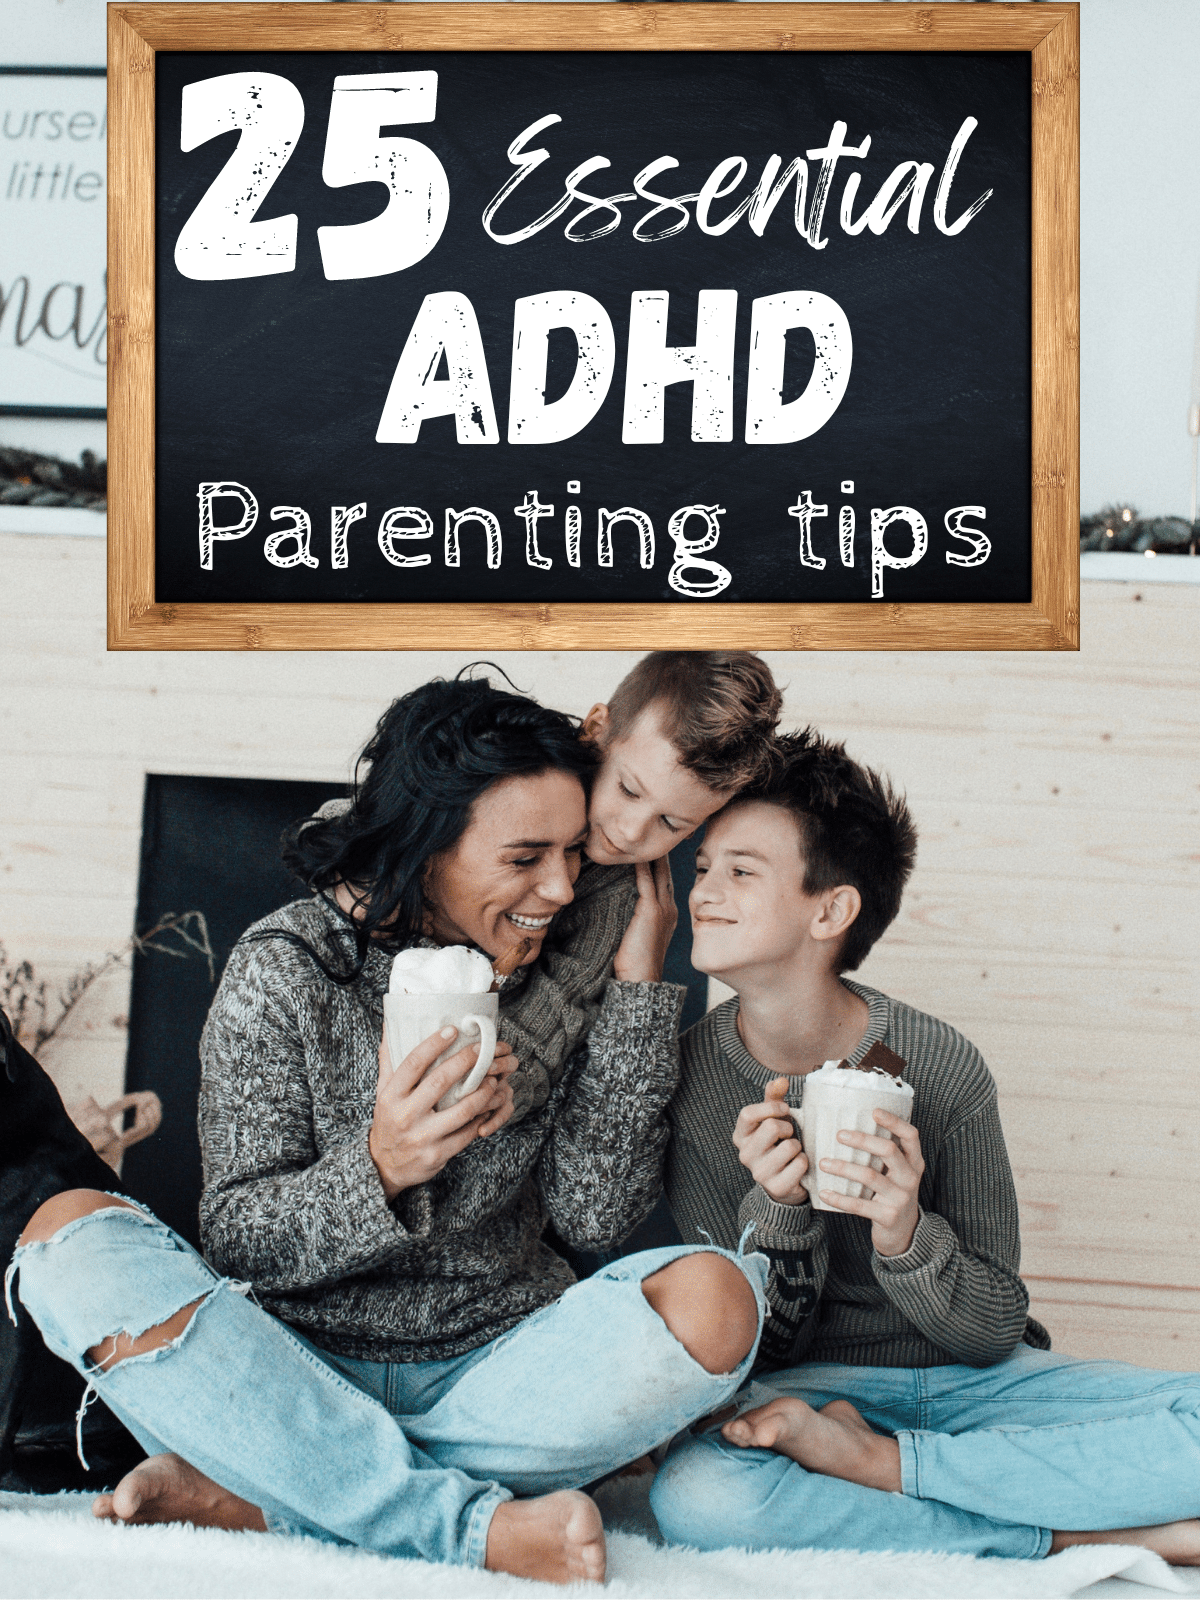 A parent and her two kids happy and hugging with the text "25 essential adhd parenting tips."